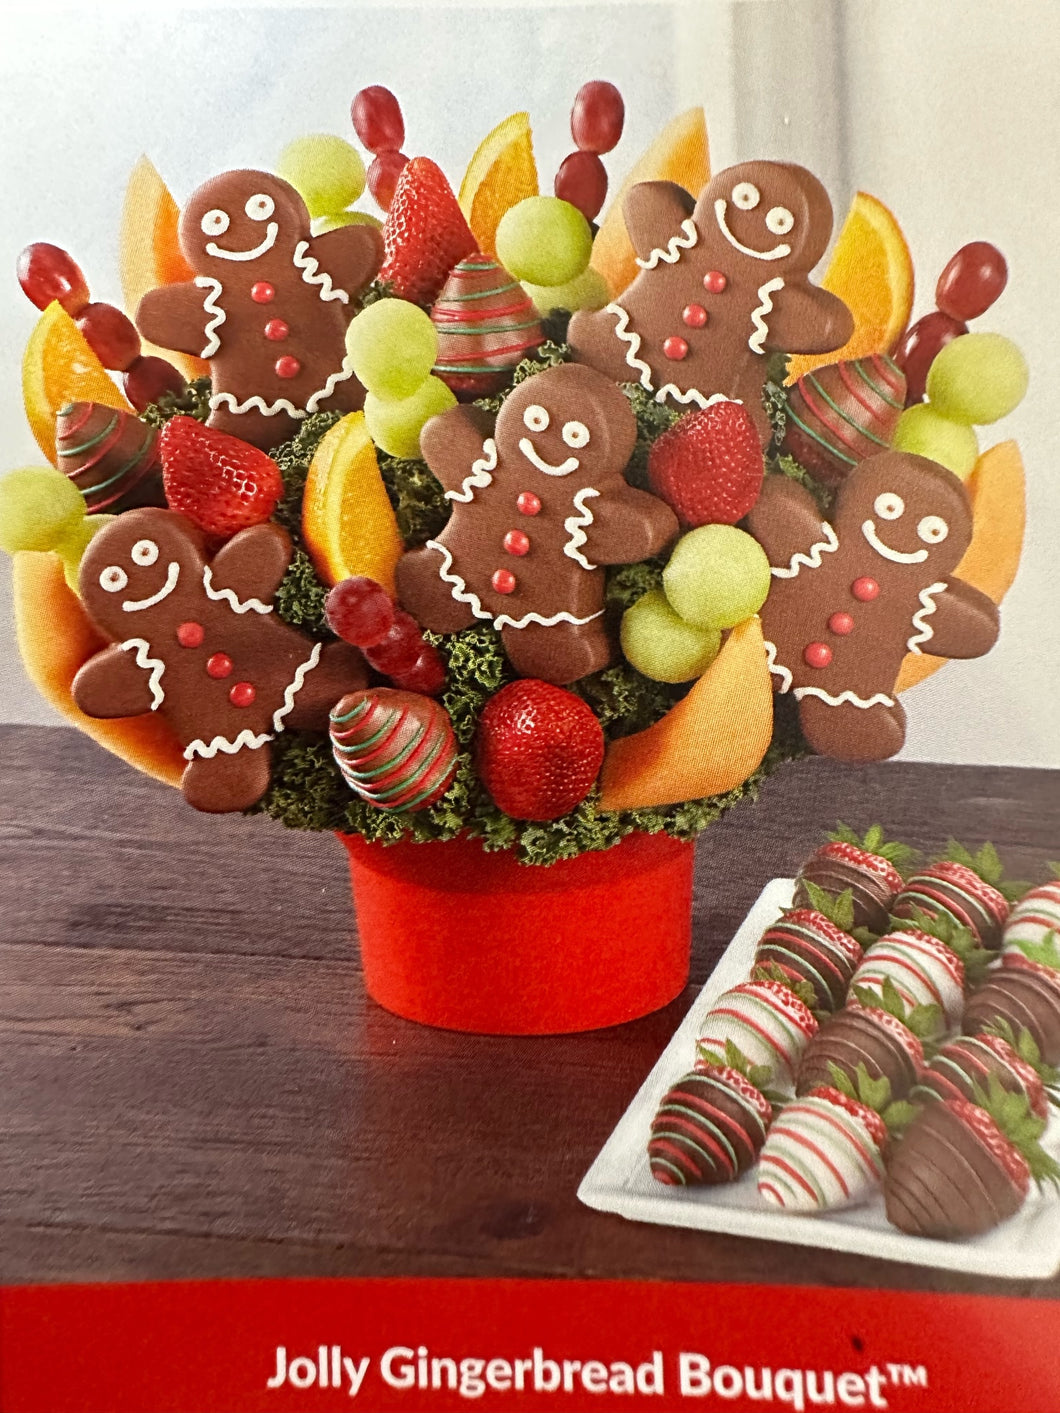 GINGERBREAD BOUQUET AND BERRY COMBO